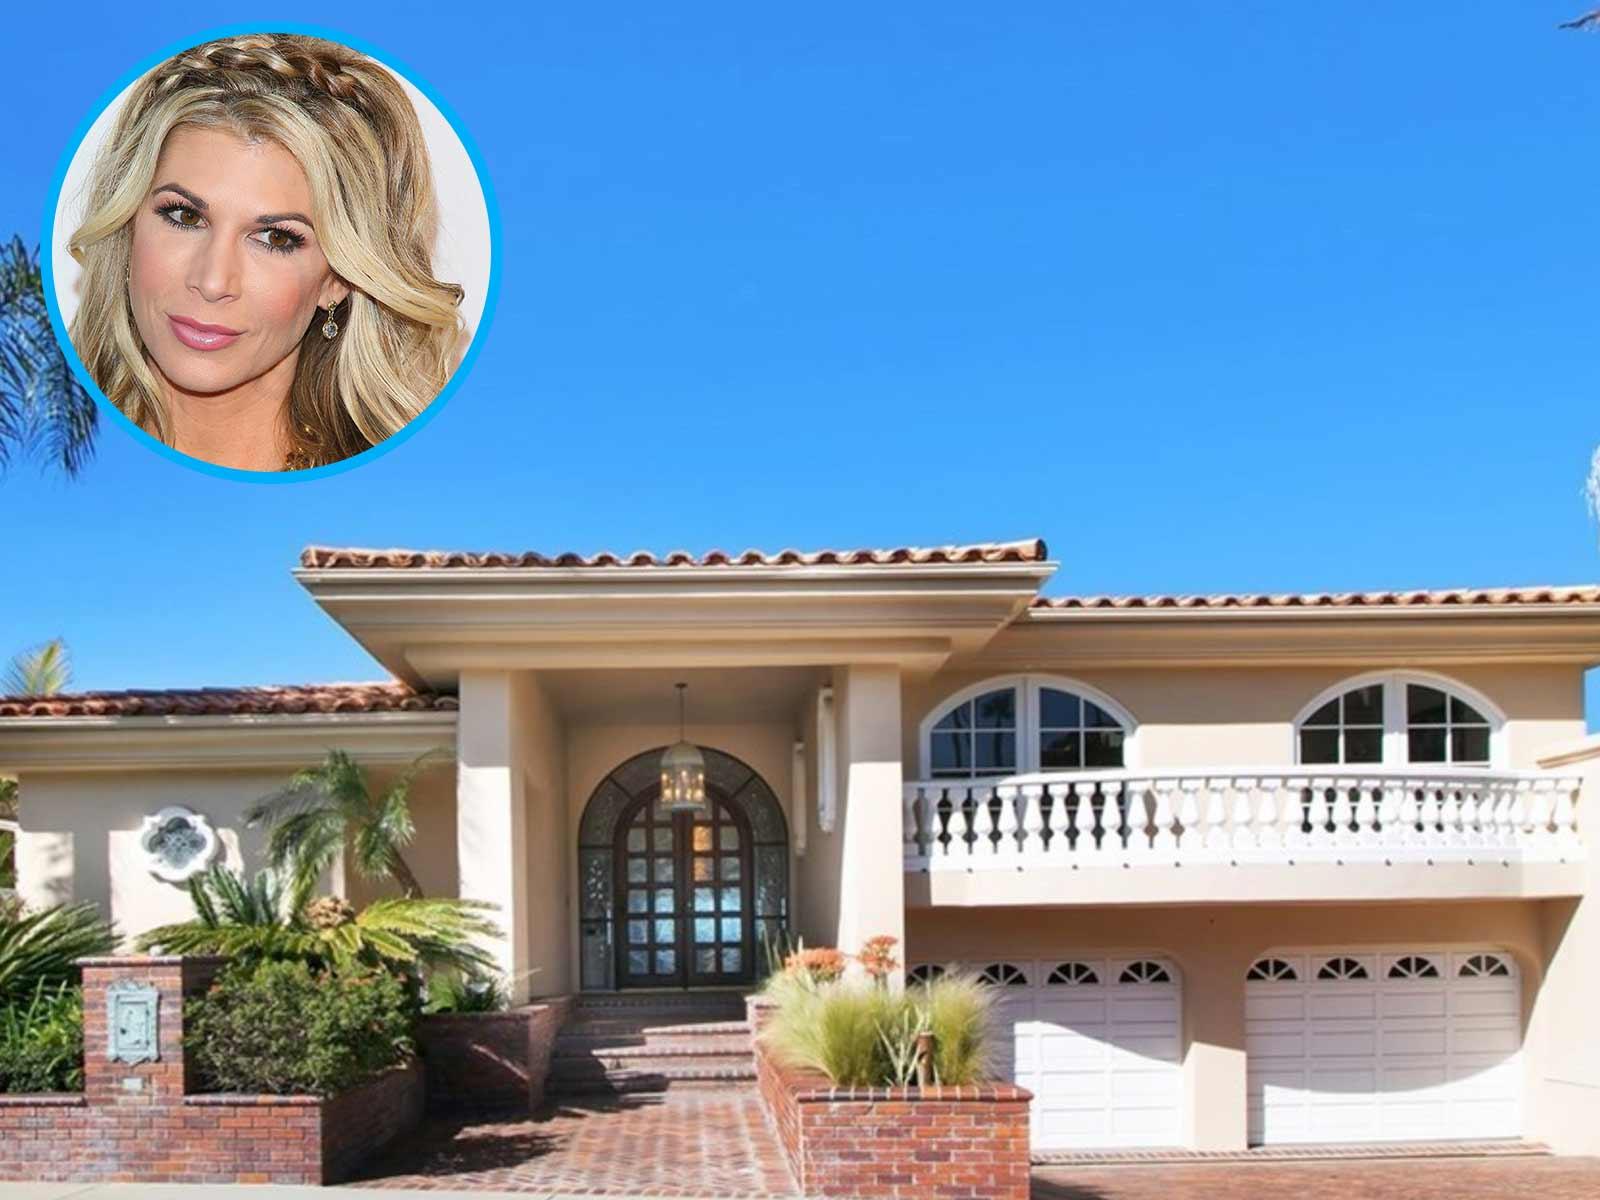 ‘RHOC’ Stars Jim and Alexis Bellino Dropped $4 Million on Mansion Before Divorce